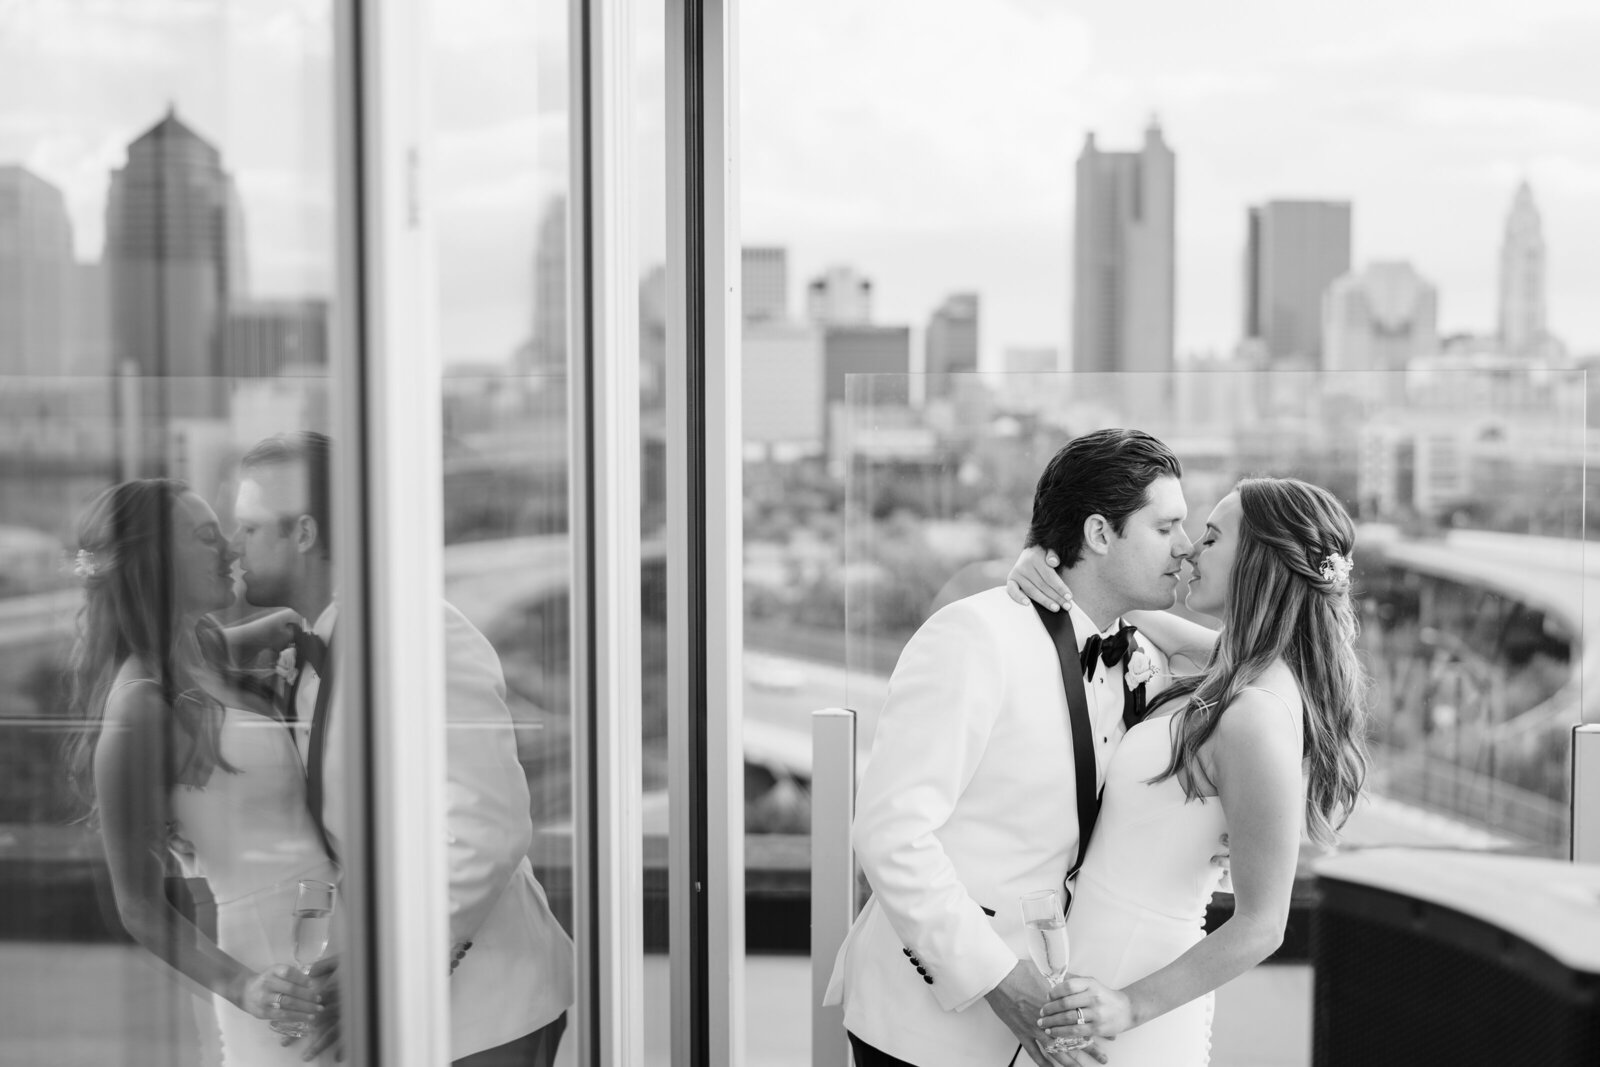 A groom in a white tuxedo dips his bride and kisses her with the Columbus skyline in the background